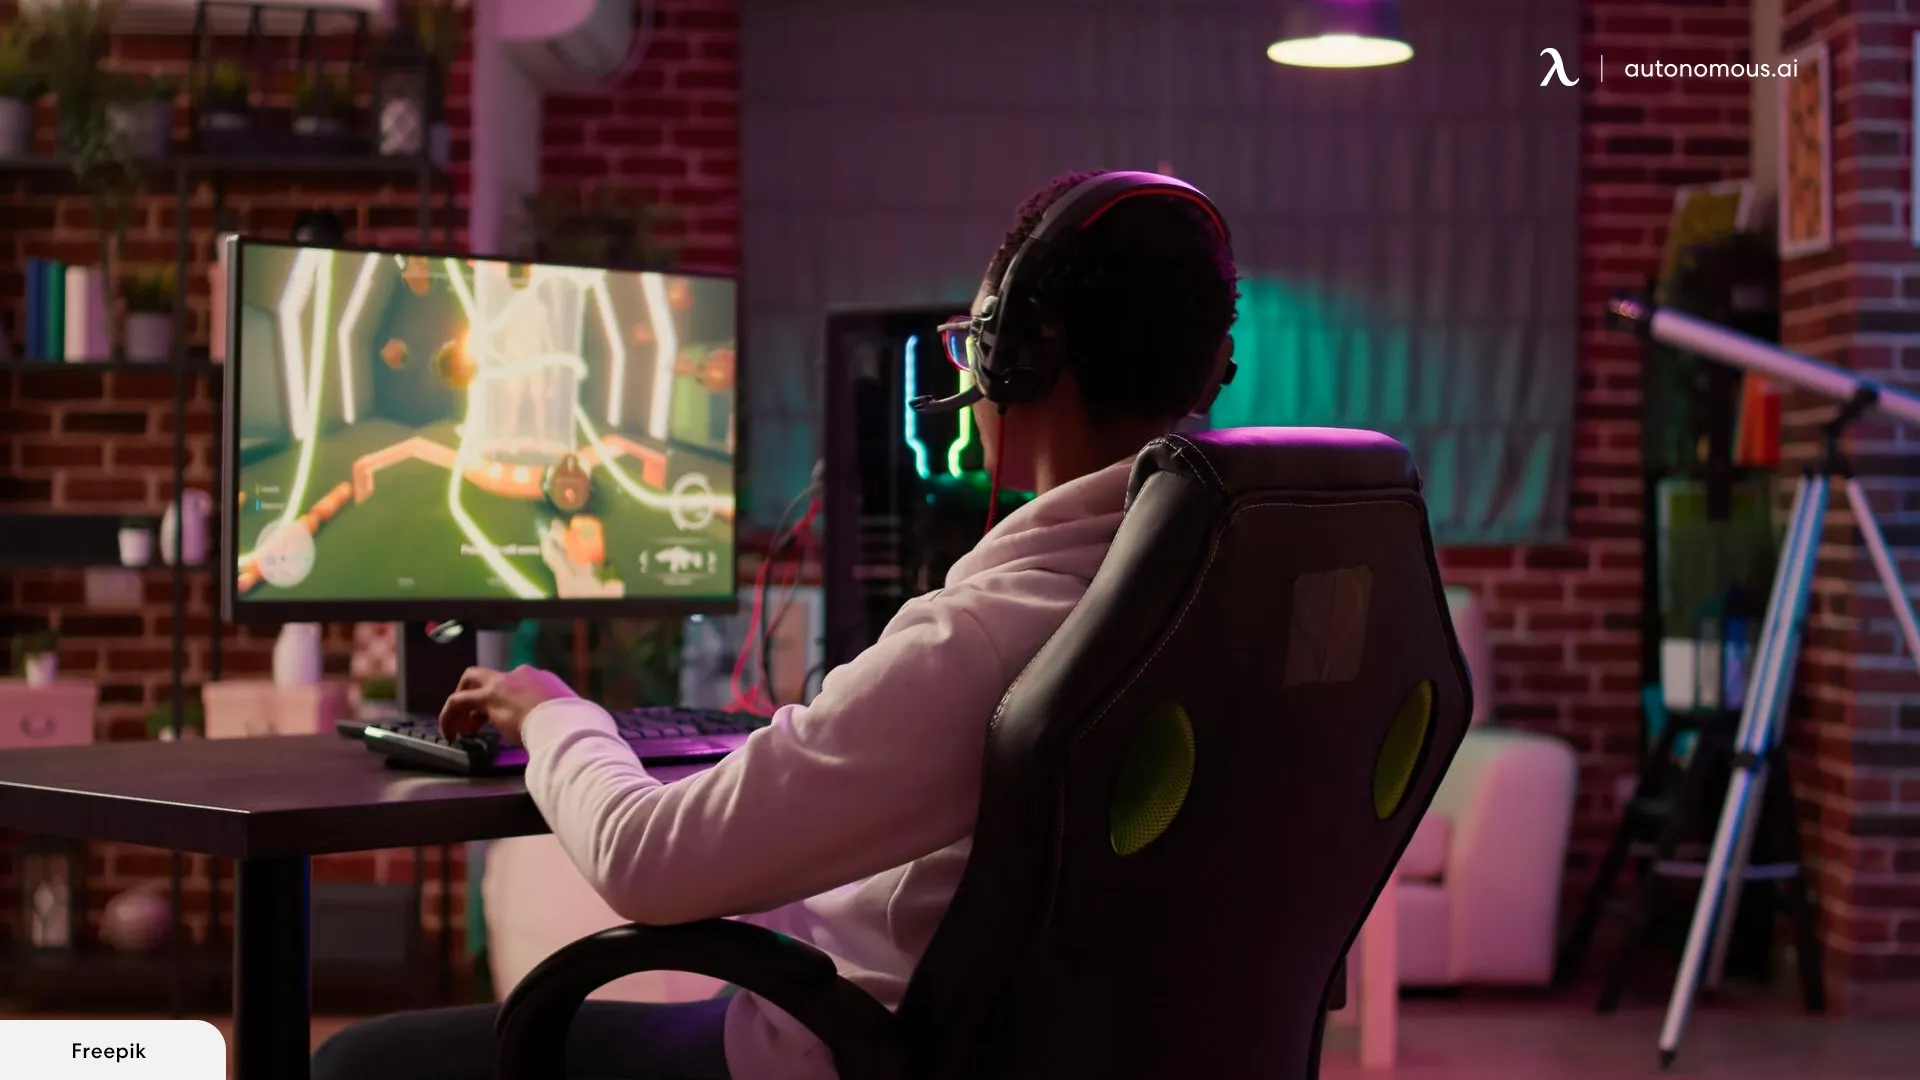 What Physical Impact Do Colors Have on PC Gaming Chair Users? 